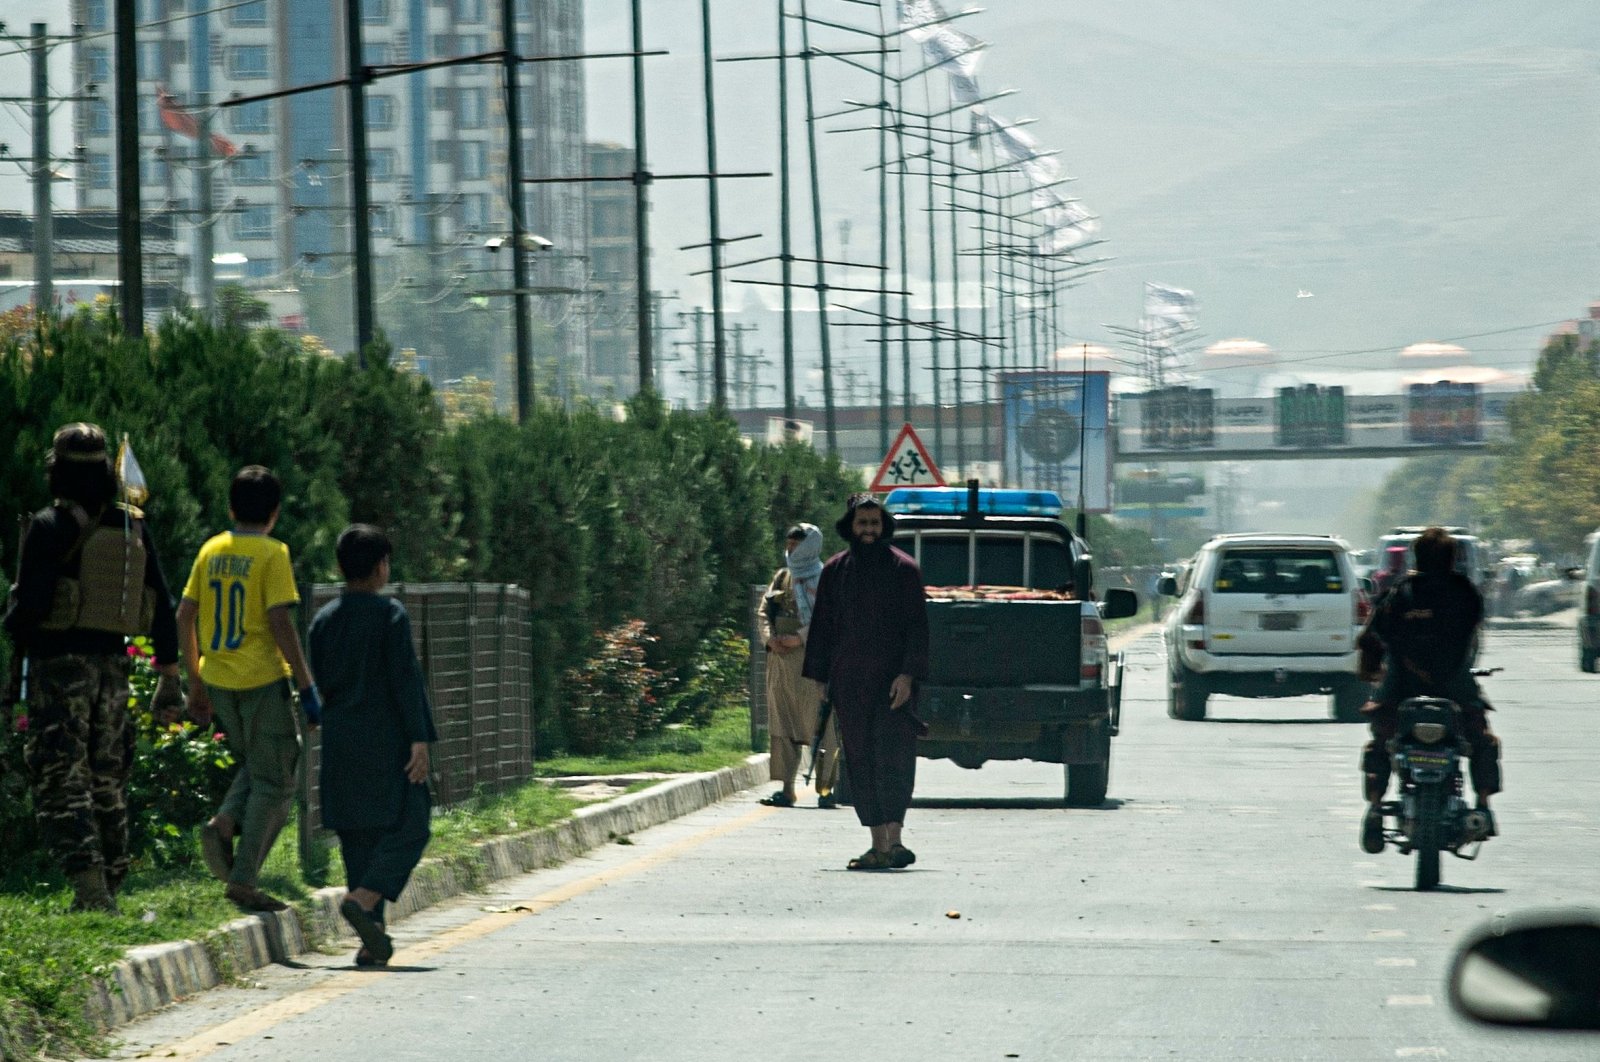 Taliban fighters (C) stand guard along a road near the Russian Embassy after a suicide attack in Kabul, Afghanistan, Sept. 5, 2022. (AFP Photo)